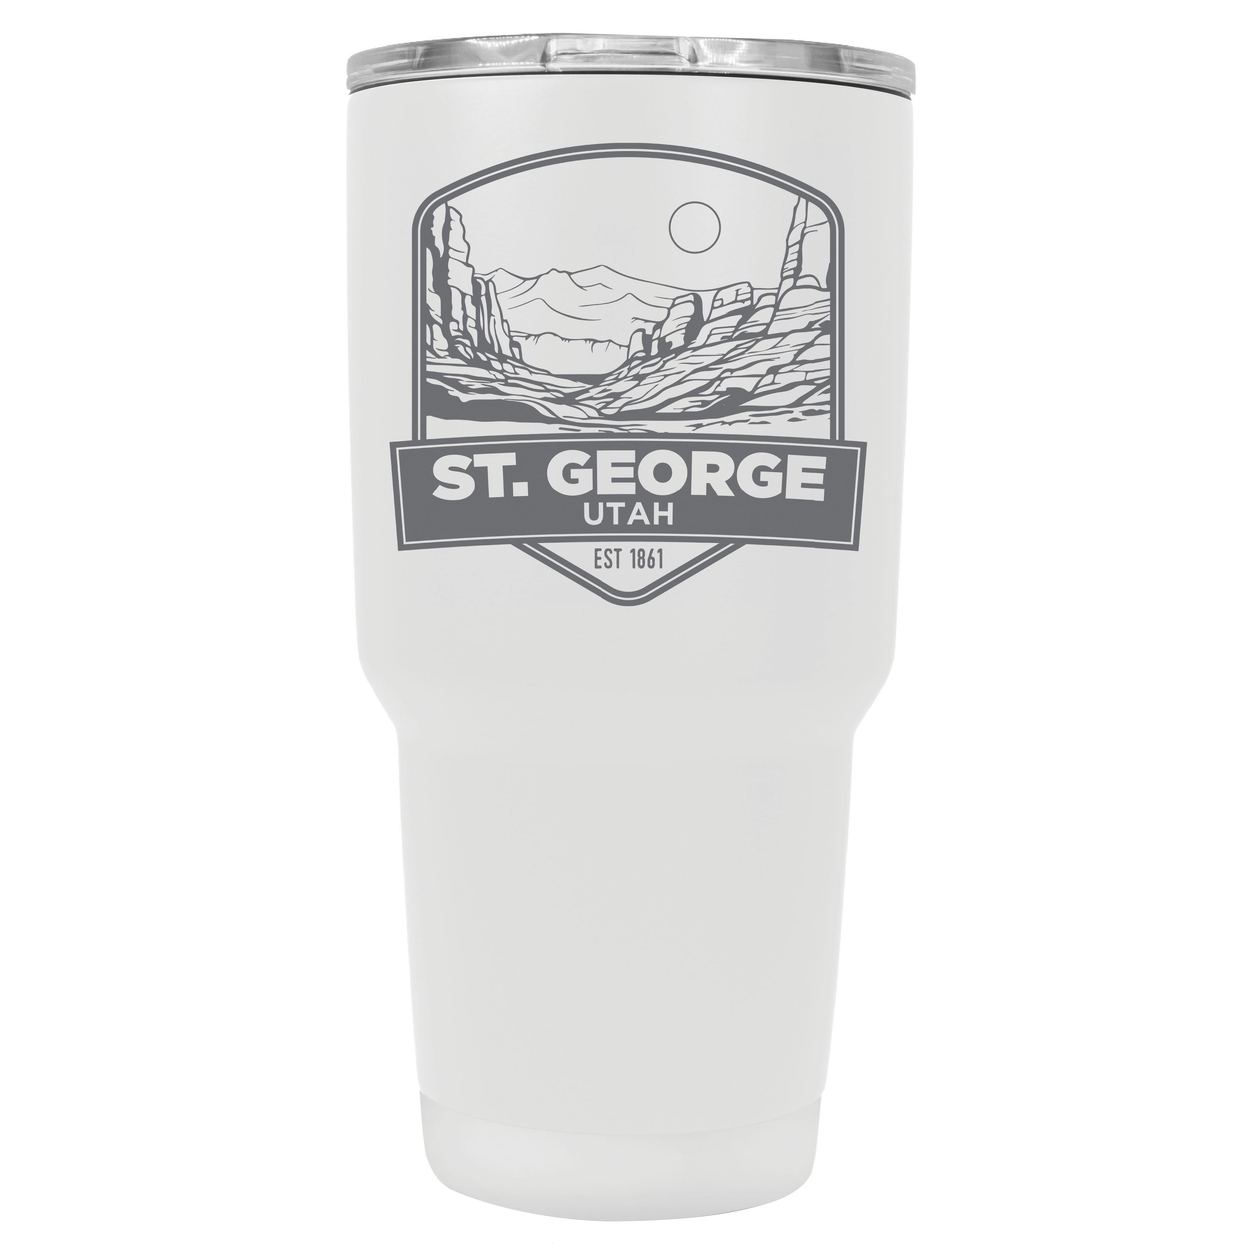 St. George Utah Souvenir 24 Oz Engraved Insulated Stainless Steel Tumbler - Rose Gold,,4-Pack